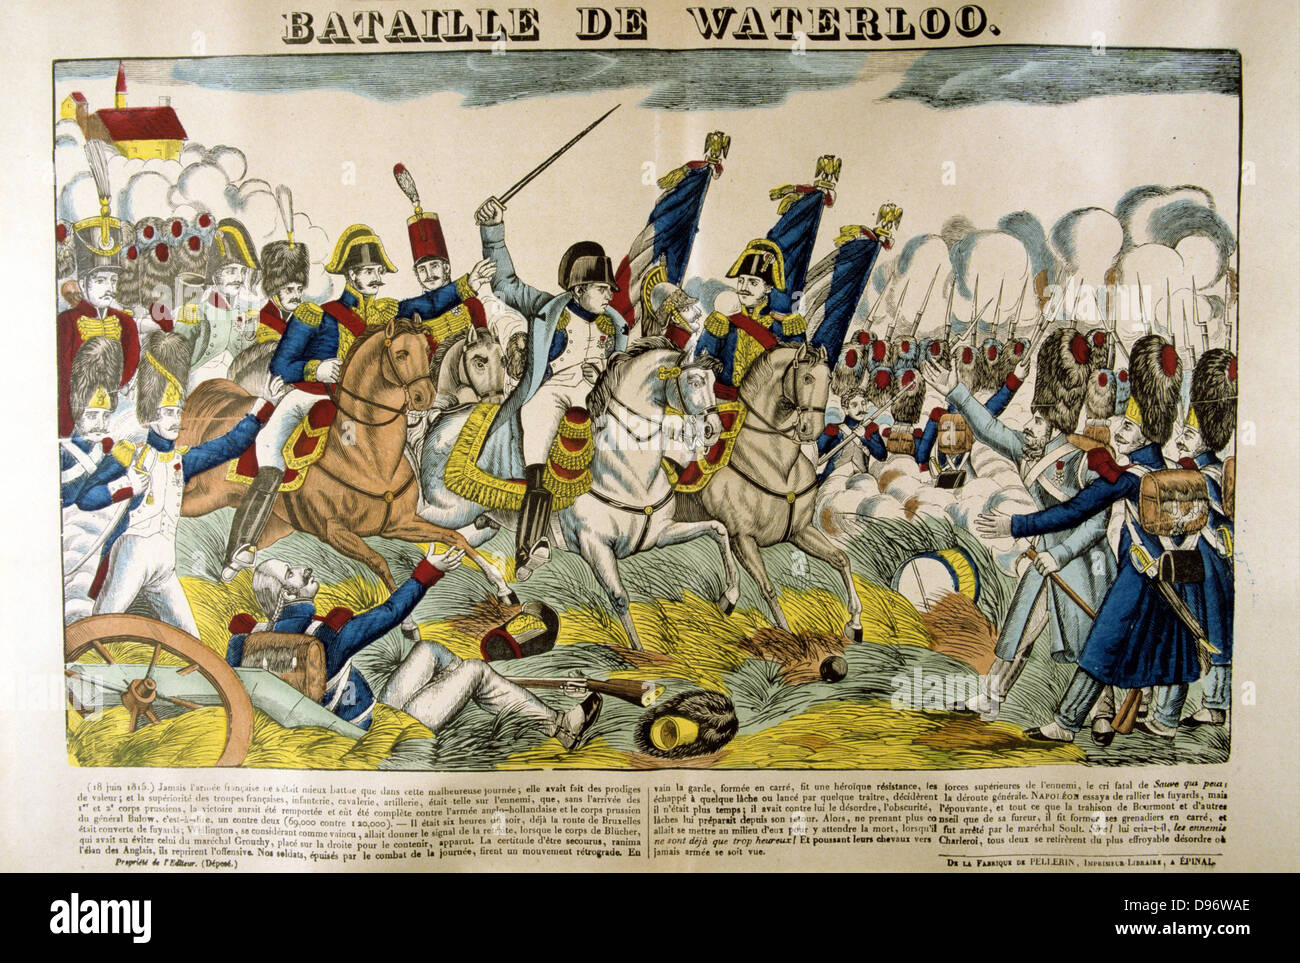 Napoleon at the Battle of Waterloo, 18 June 1815. Popular French hand-coloured woodcut. Stock Photo